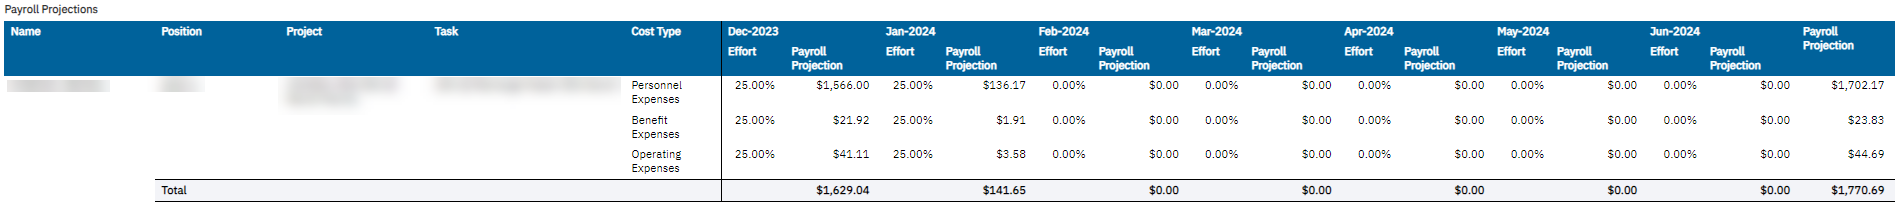 EPS payroll projections